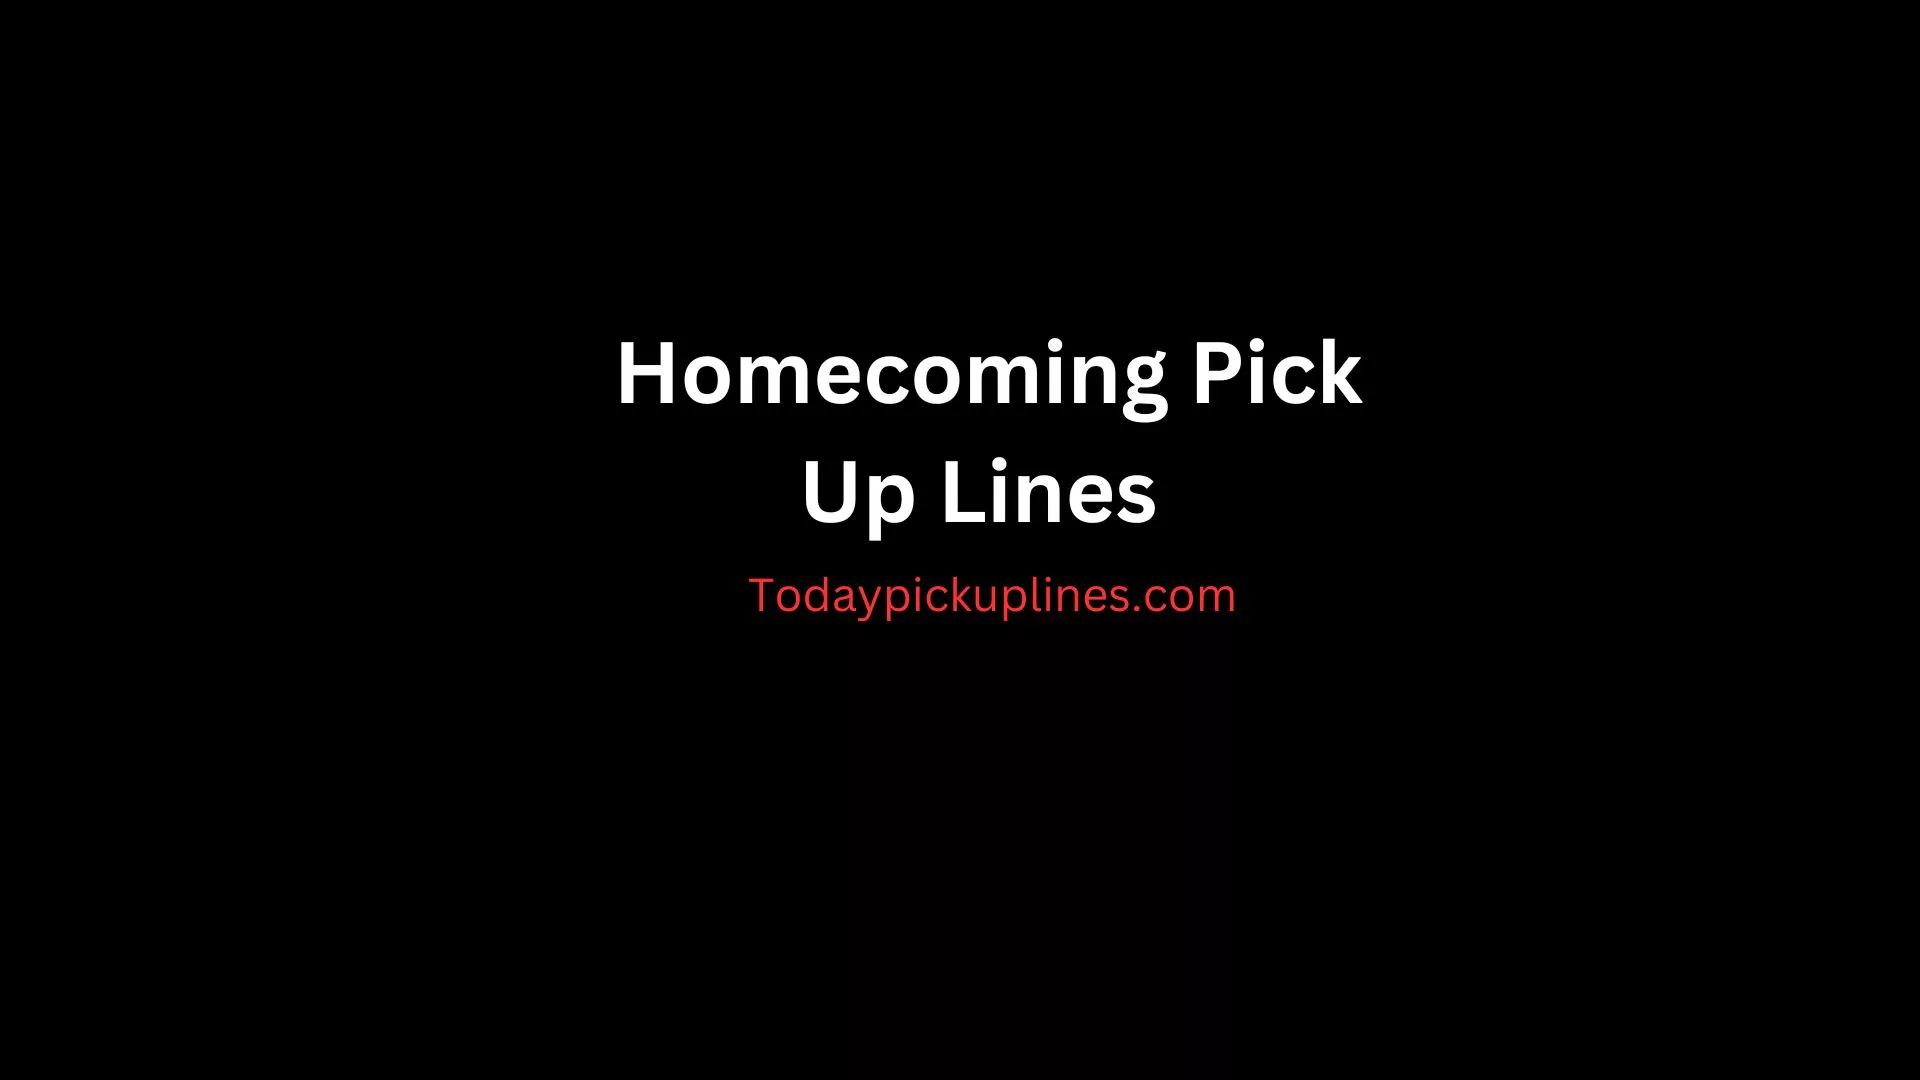 Homecoming Pick Up Lines.webp